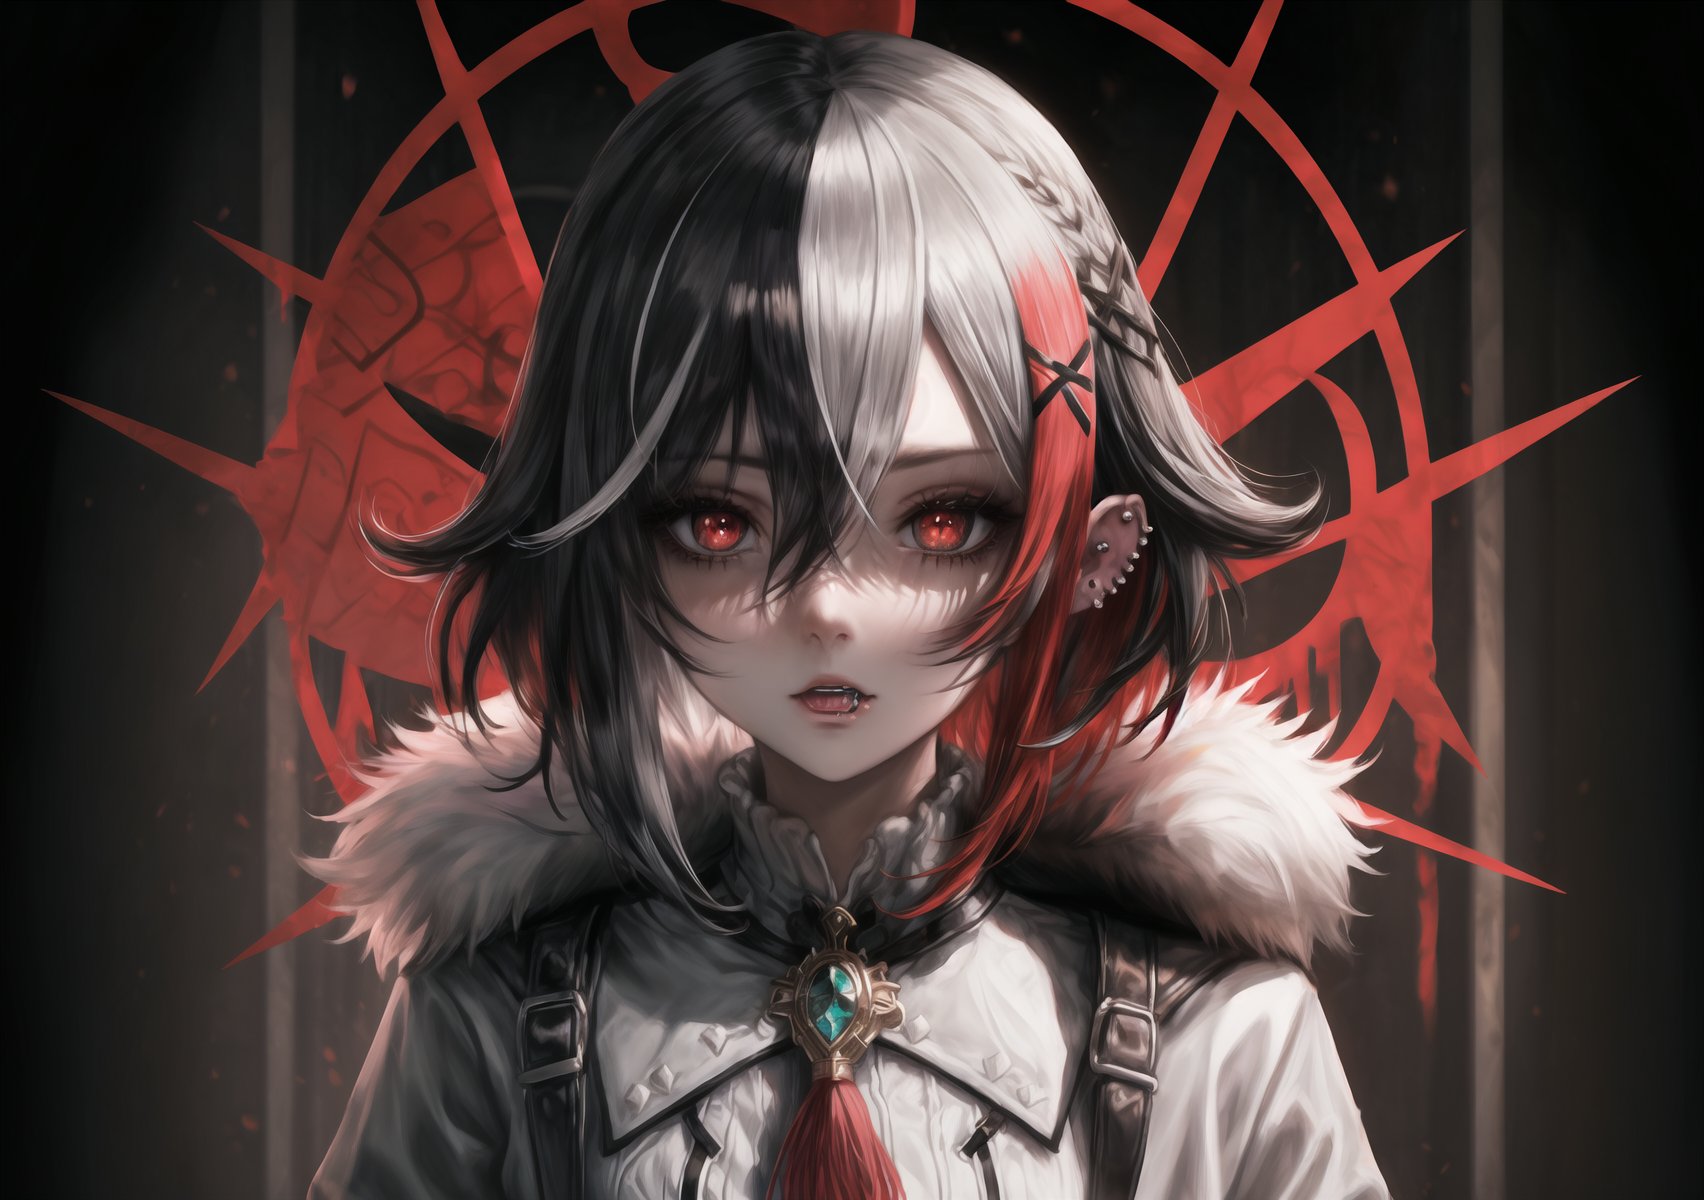 1 girl, black_eyes, coat, piercing_ears, fur coat, clipped feet, gloves, hair_between_eyes, high resolution, multicolored_hair, red_pupils, short_hair, side bangs, solo, highlighted_hair, two_tone_hair, white_gloves, white_hair, x-shaped_pupils, black_hair, blurred , brooch, cloak, dark_background, depth_of_field, fur-trimmed coat, fur trim, hair_between_eyes, high-res, jewelry, looking_at_viewer, multicolored_hair, portrait, red_eyes, shorthair, solo, streaked_hair, symbol_pupils, two-tone_hair, white_coat, white_hair, x-shaped_pupils,perfecteyes